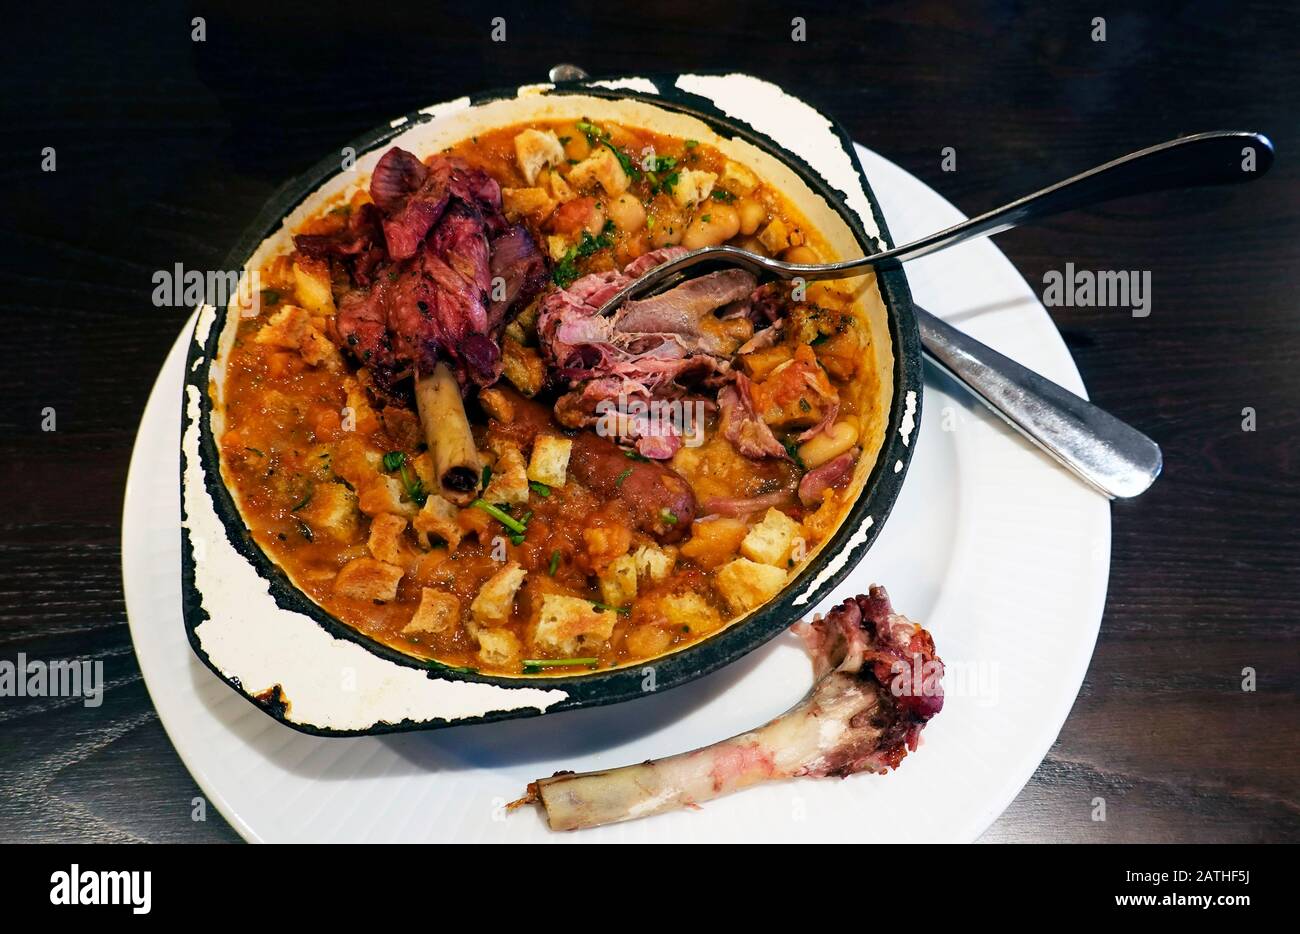 Cassoulet, a rustic French duck stew with beans, sausage, and veggies Stock Photo